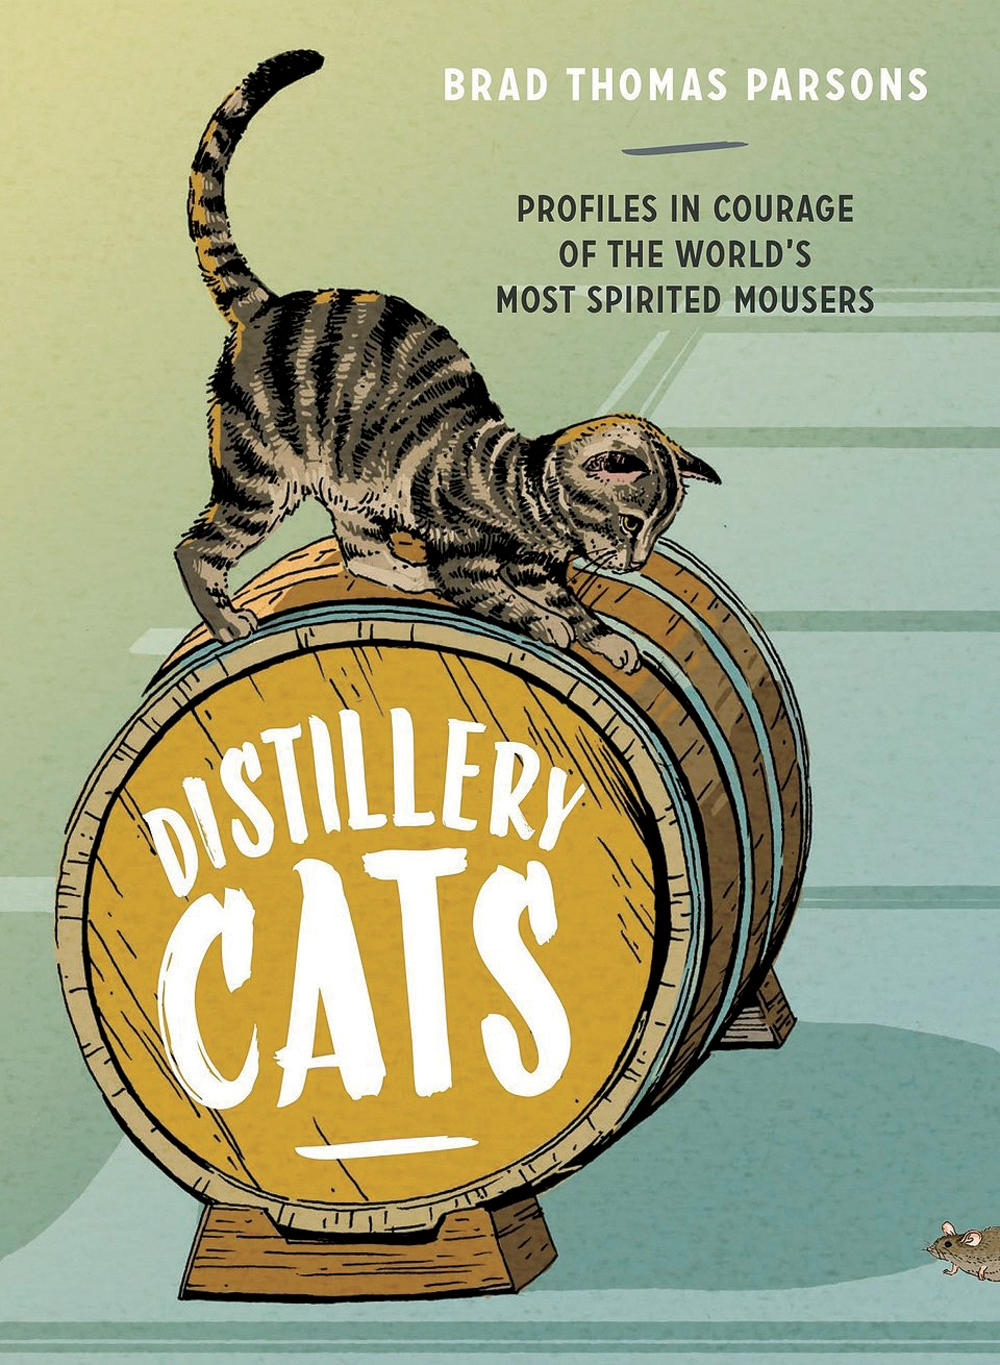 "Distillery Cats" book cover